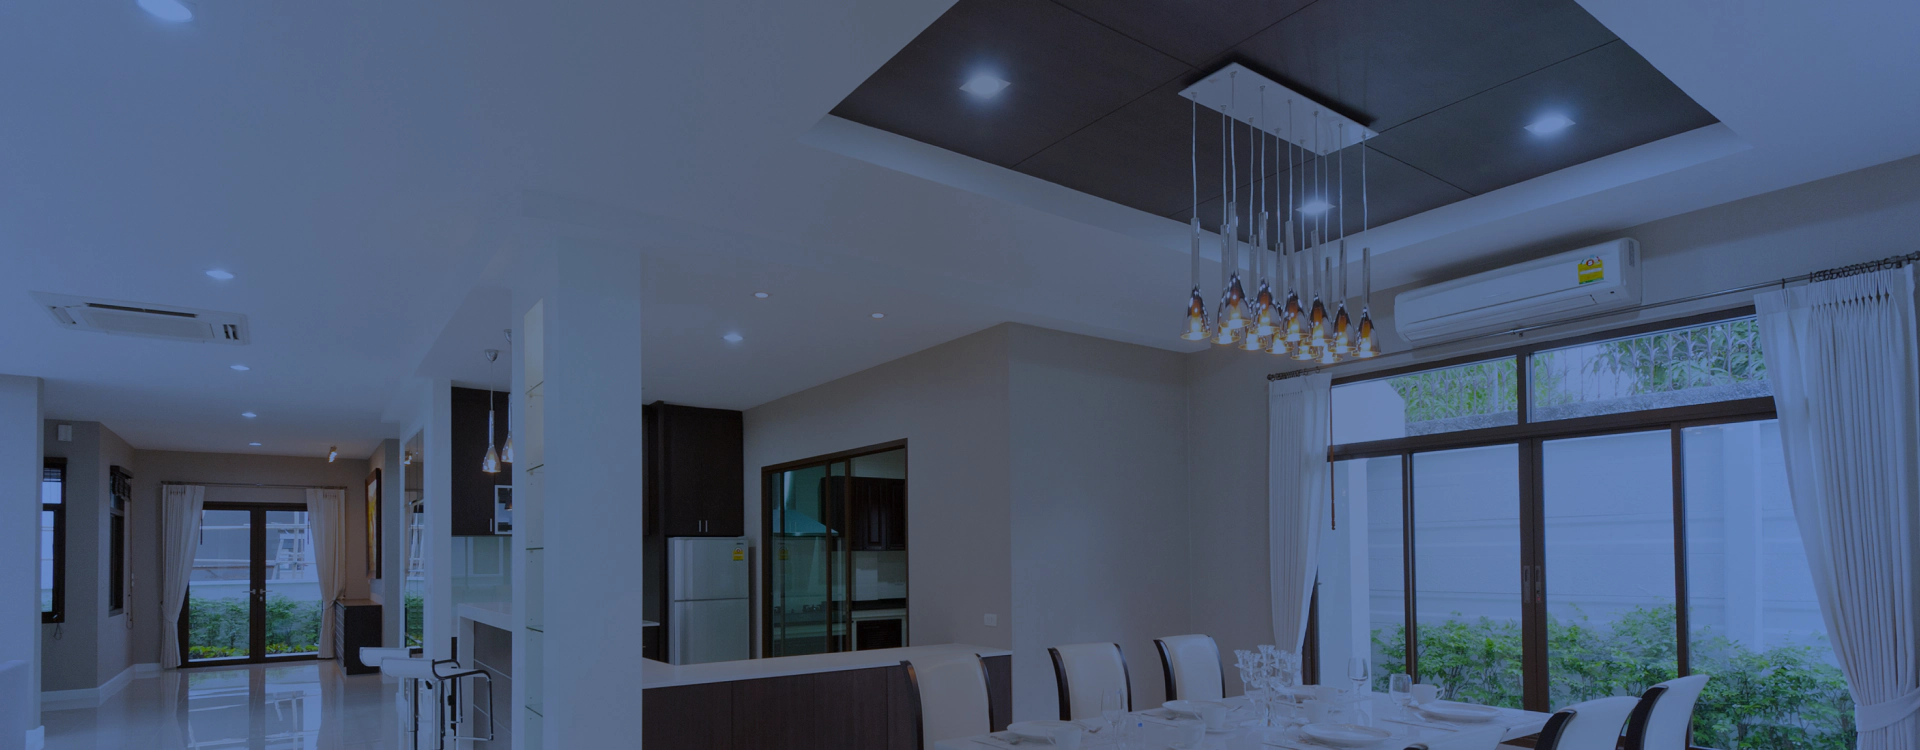 dining room with lights